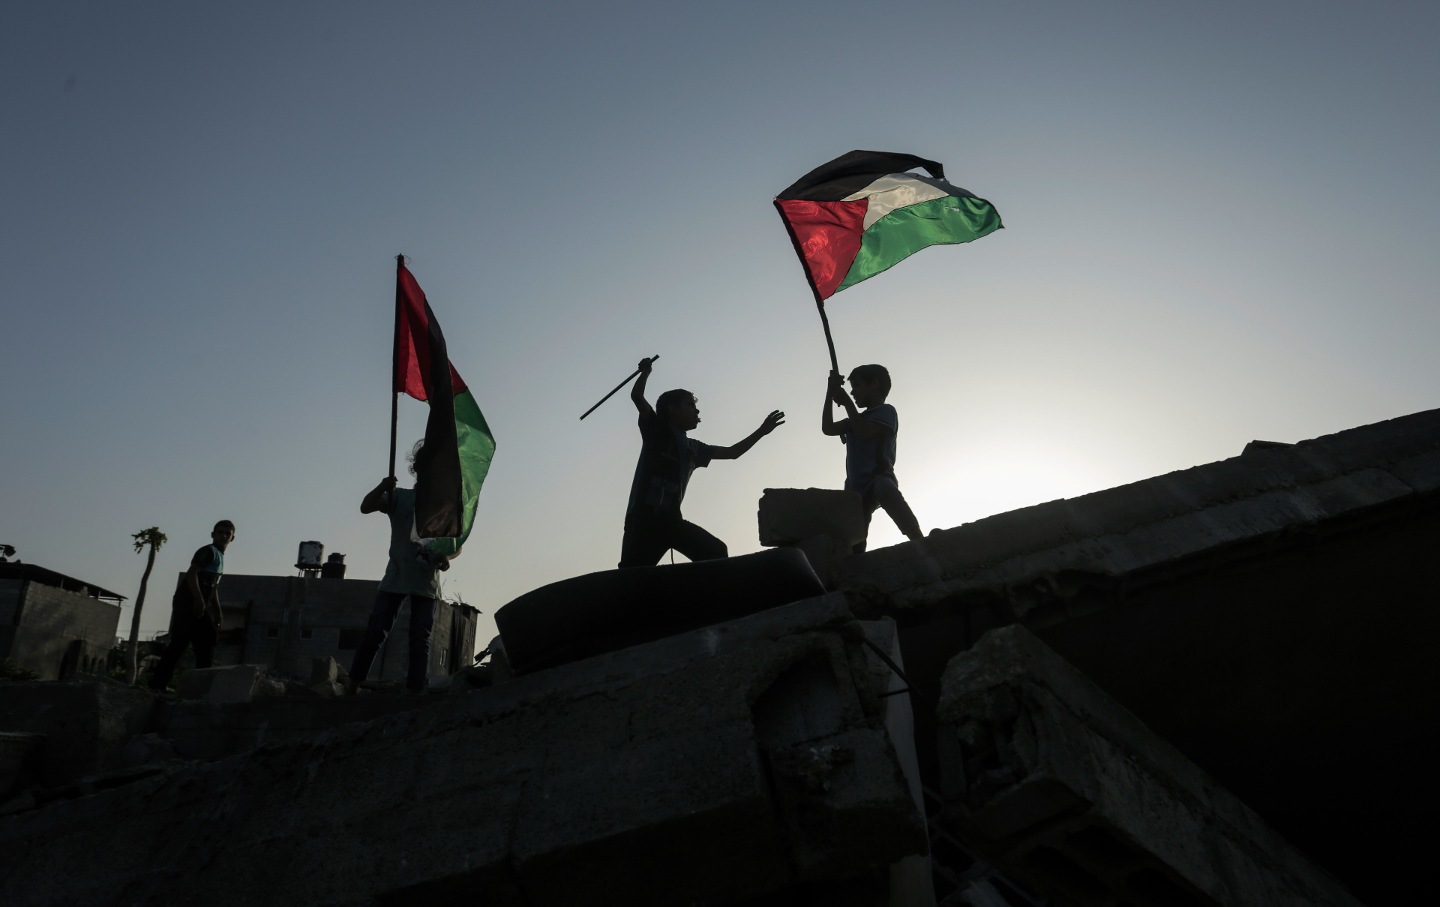 Kids wave Palestinian flags amidst the ruins of their destroyed home following Israeli raids on the town of Beit Lahiya in the northern Gaza Strip.